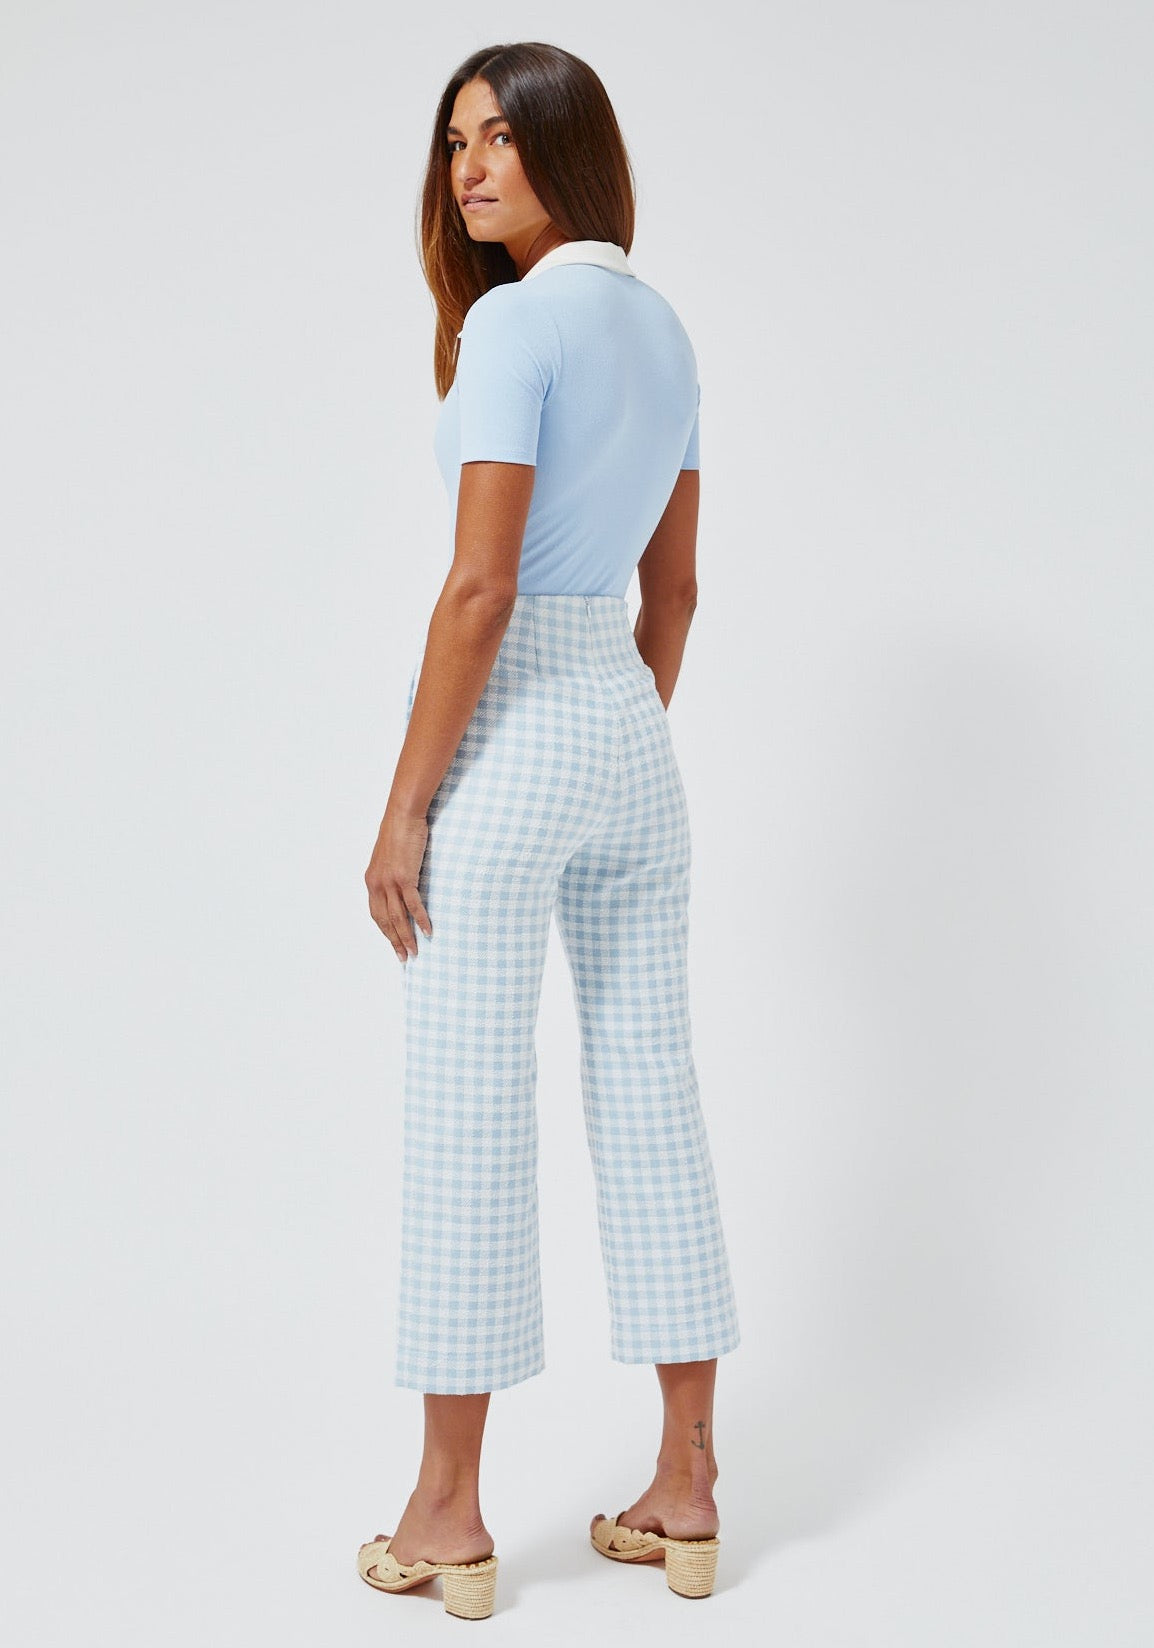 THE STRAIGHT LEG TROUSER in VINTAGE BLUE GINGHAM BOUCLE COTTON